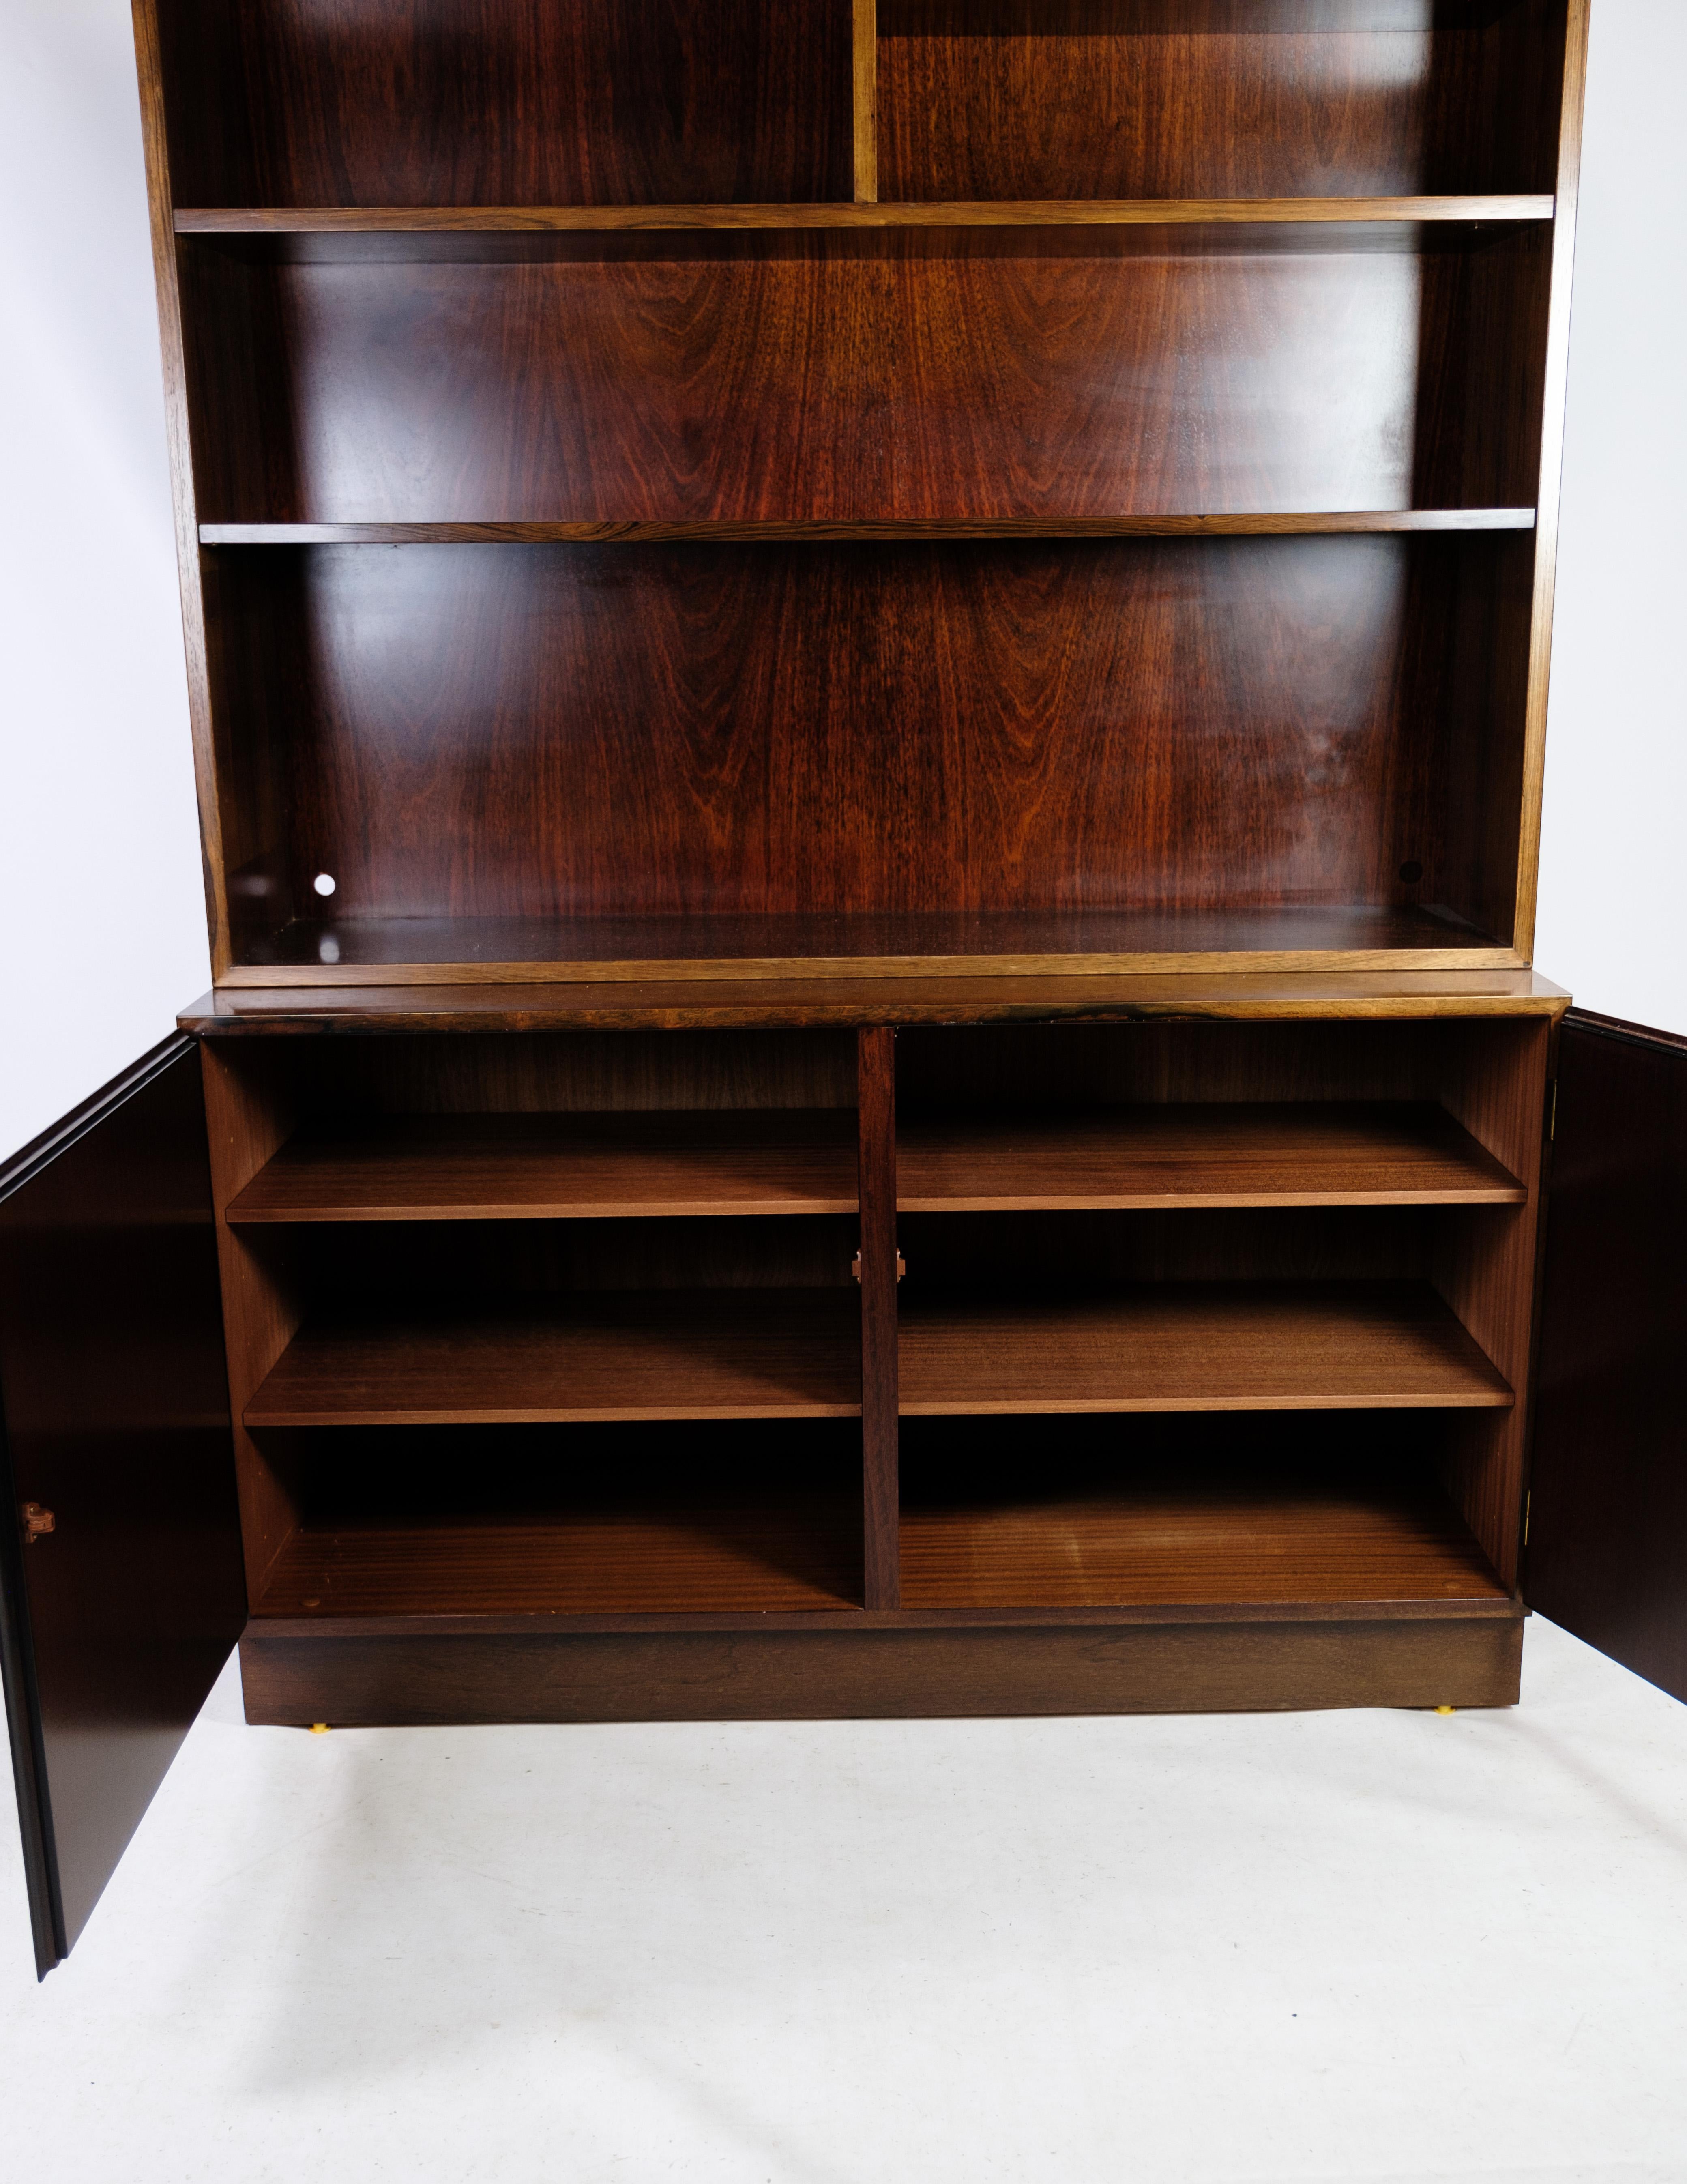 Shelving system with secretary, Model 9, designed by Omann Junior in rosewood of Danish design, manufactured at Omann Junior's Møbelfabrik from the 1960s. Consisting of a lower part with 2 doors and a showcase upper part with shelves.
Measures: